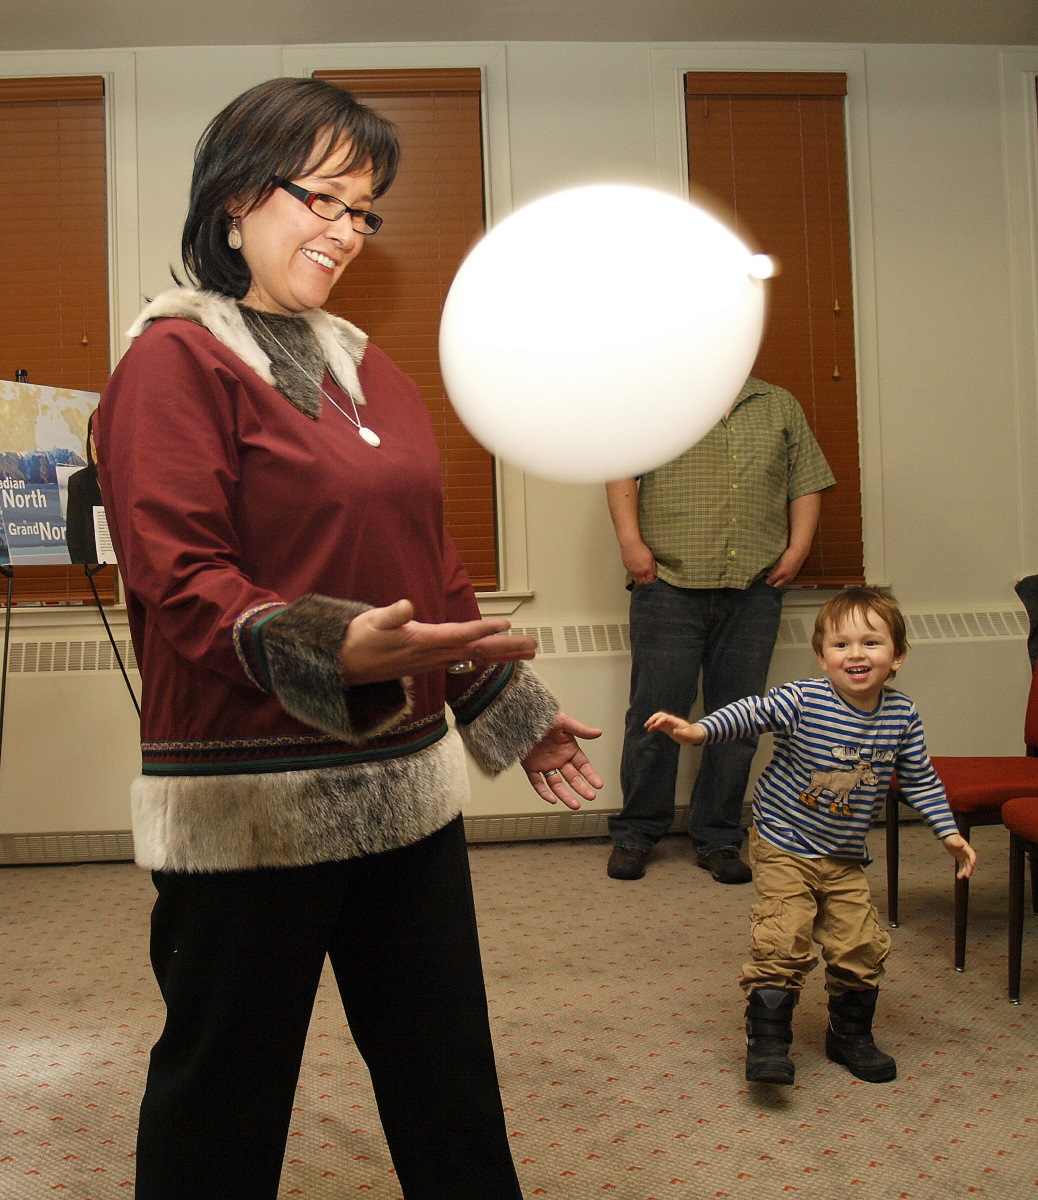 Nunavut Conservative MP Leona Aglukkaq plays with a balloon with her son Cooper during an election night party at Iqaluit's Frobisher Inn. Aglukkaq cruised to a second term as Nunavut's MP, winning nearly 50 per cent of the vote and easily outpacing her Liberal and New Democratic Party rivals. (PHOTO BY CHRIS WINDEYER)